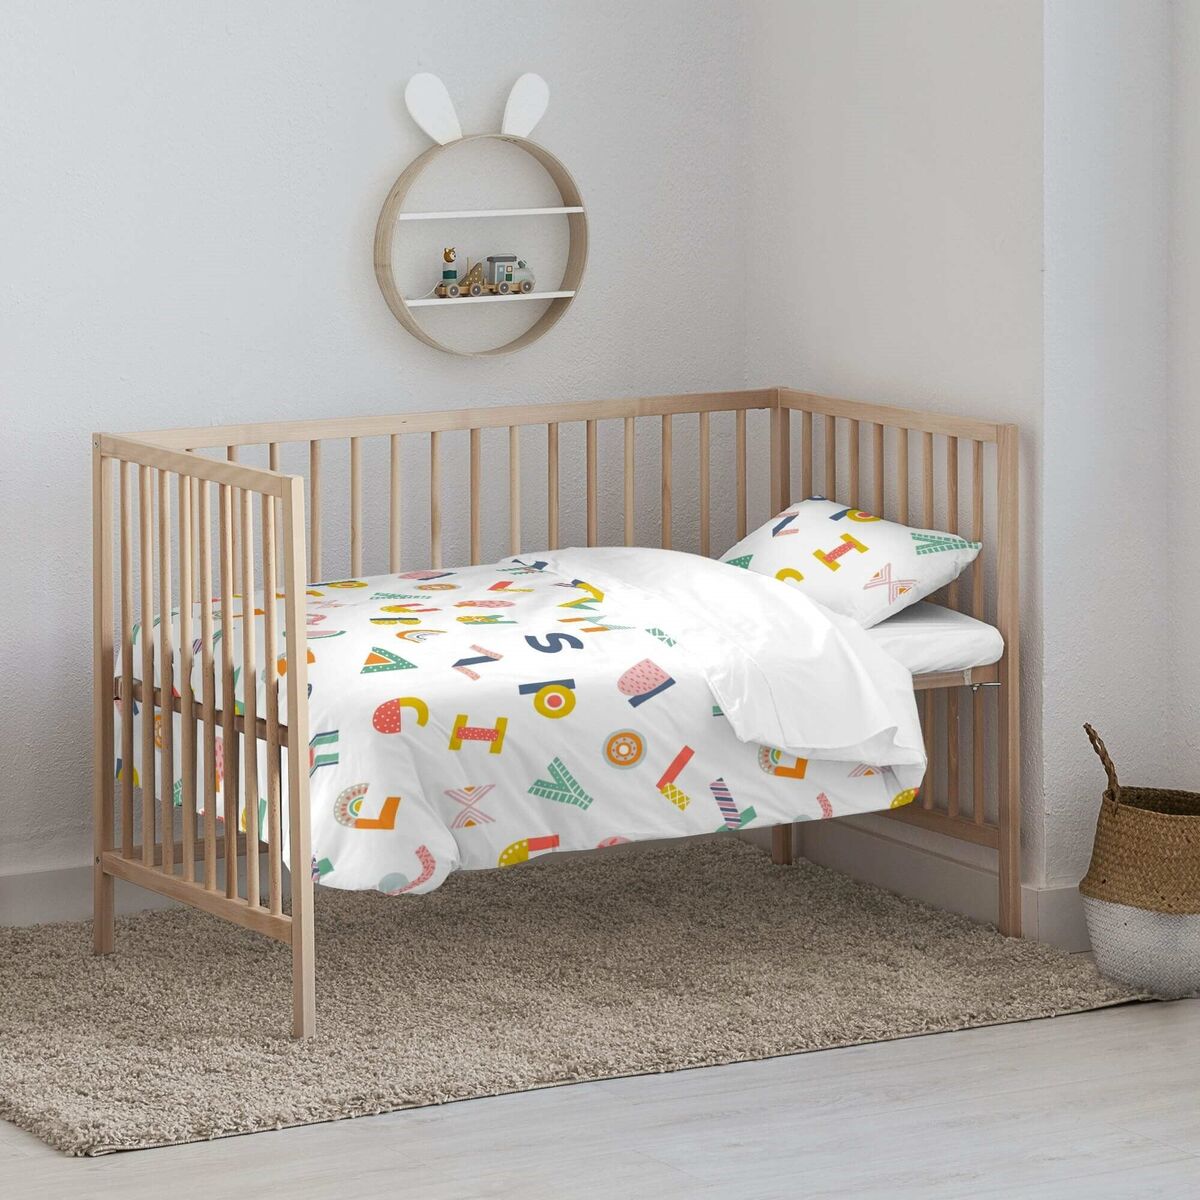 Cot Quilt Cover Kids&Cotton Urko Small 100 x 120 cm